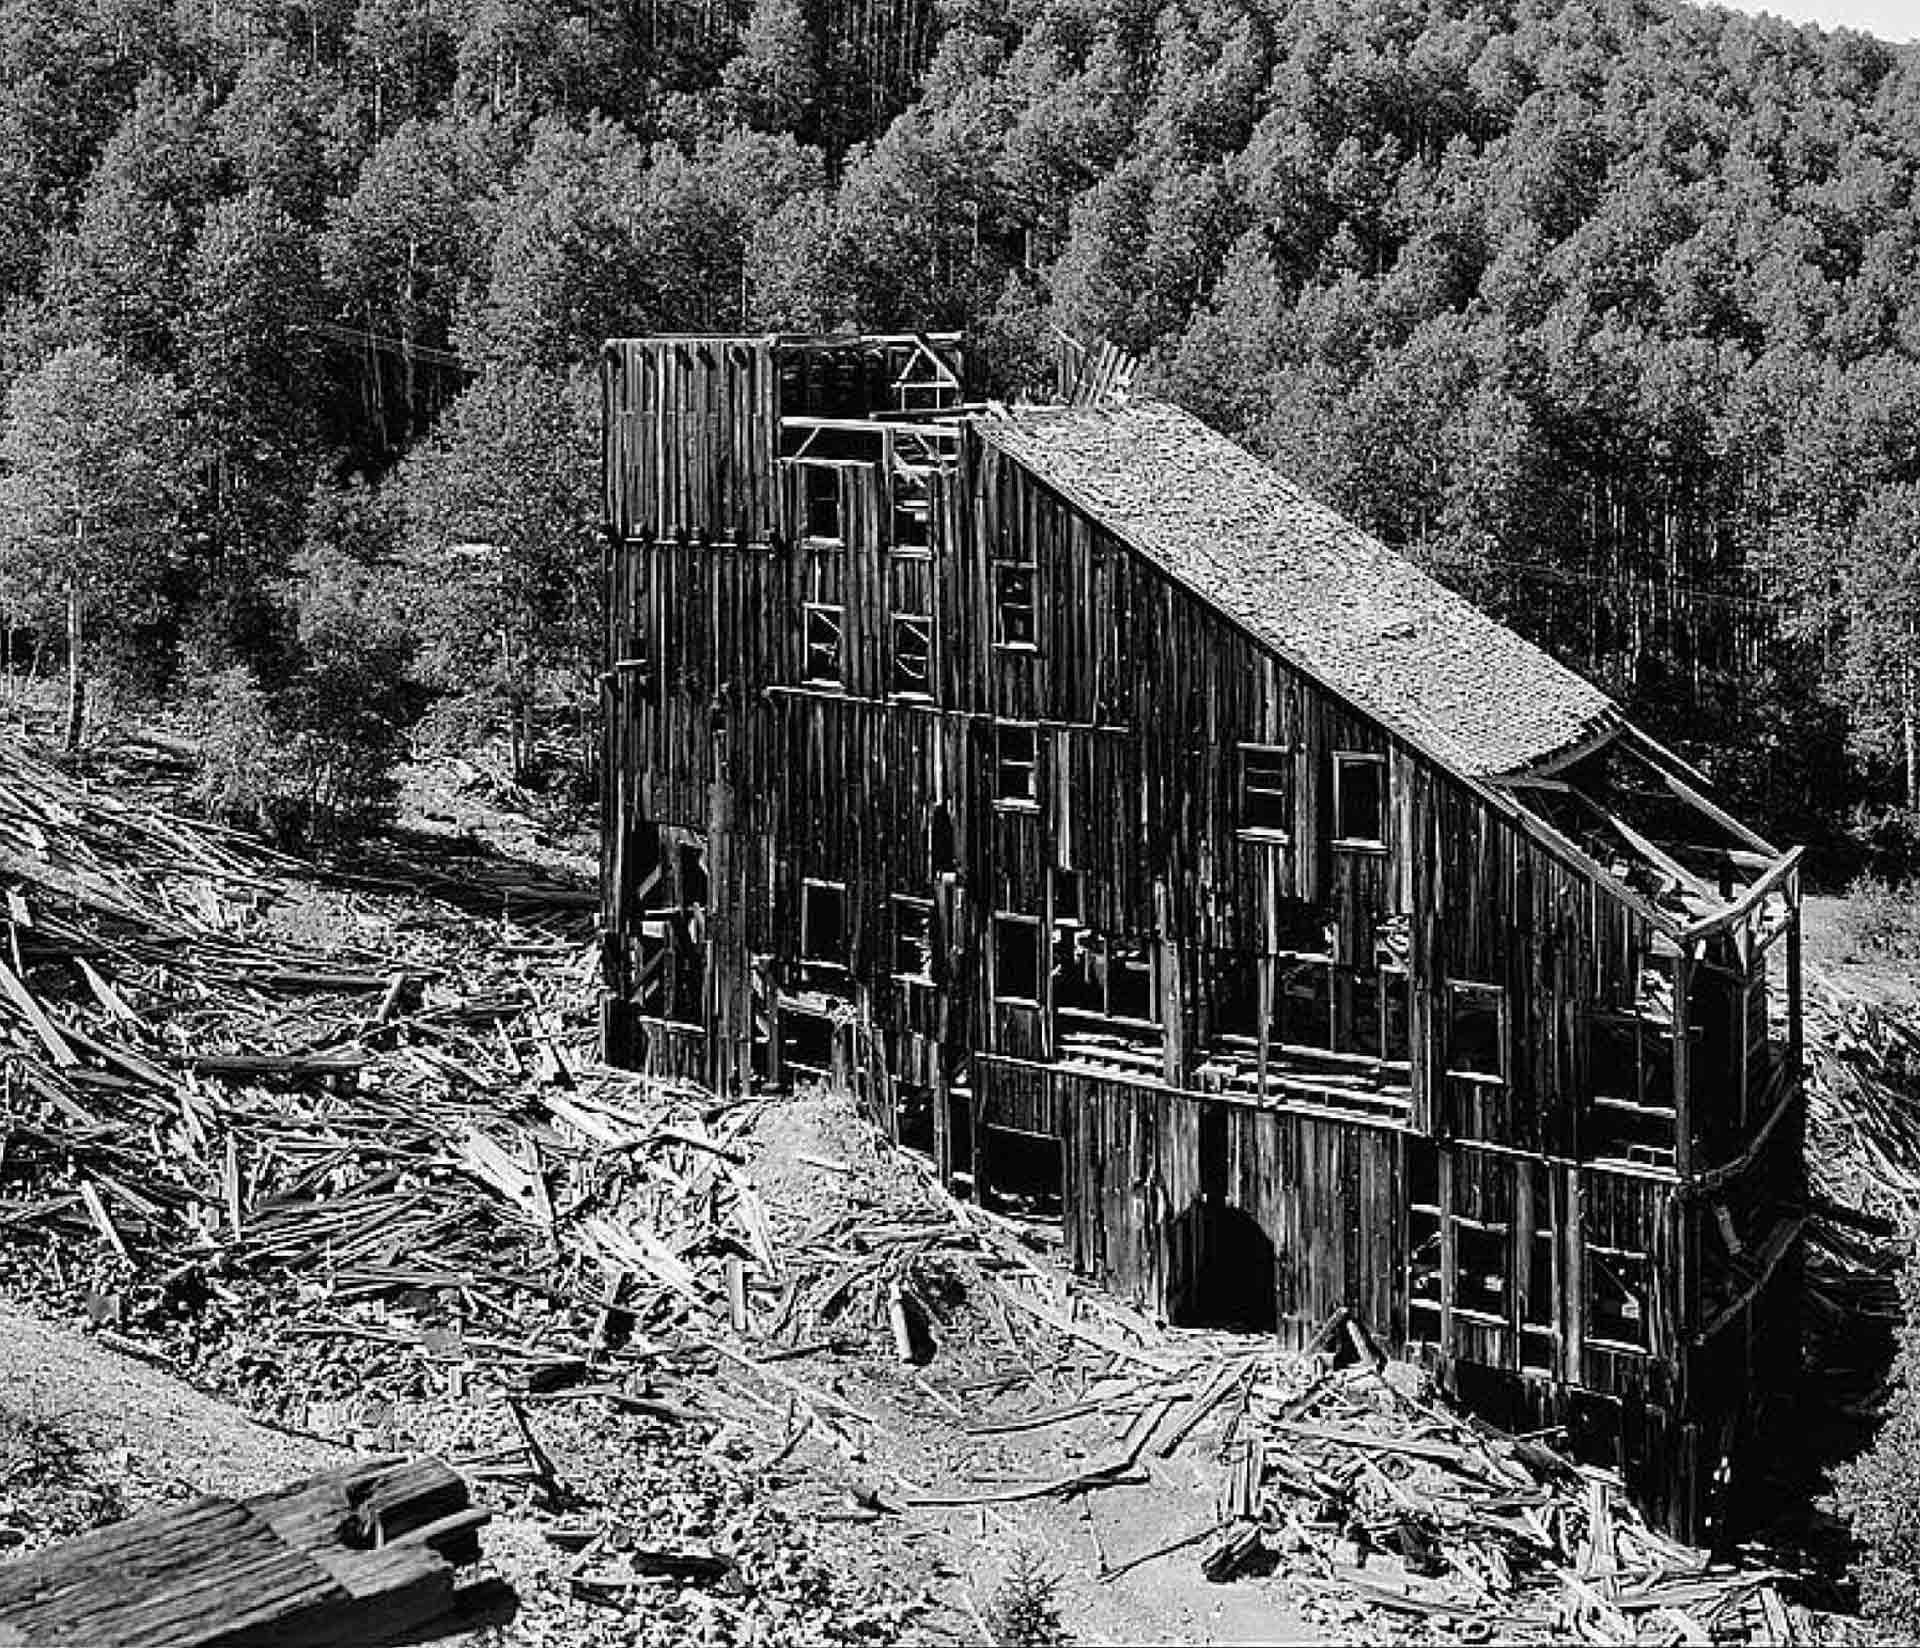 A historical image of Keystone Mill in Park City, Utah